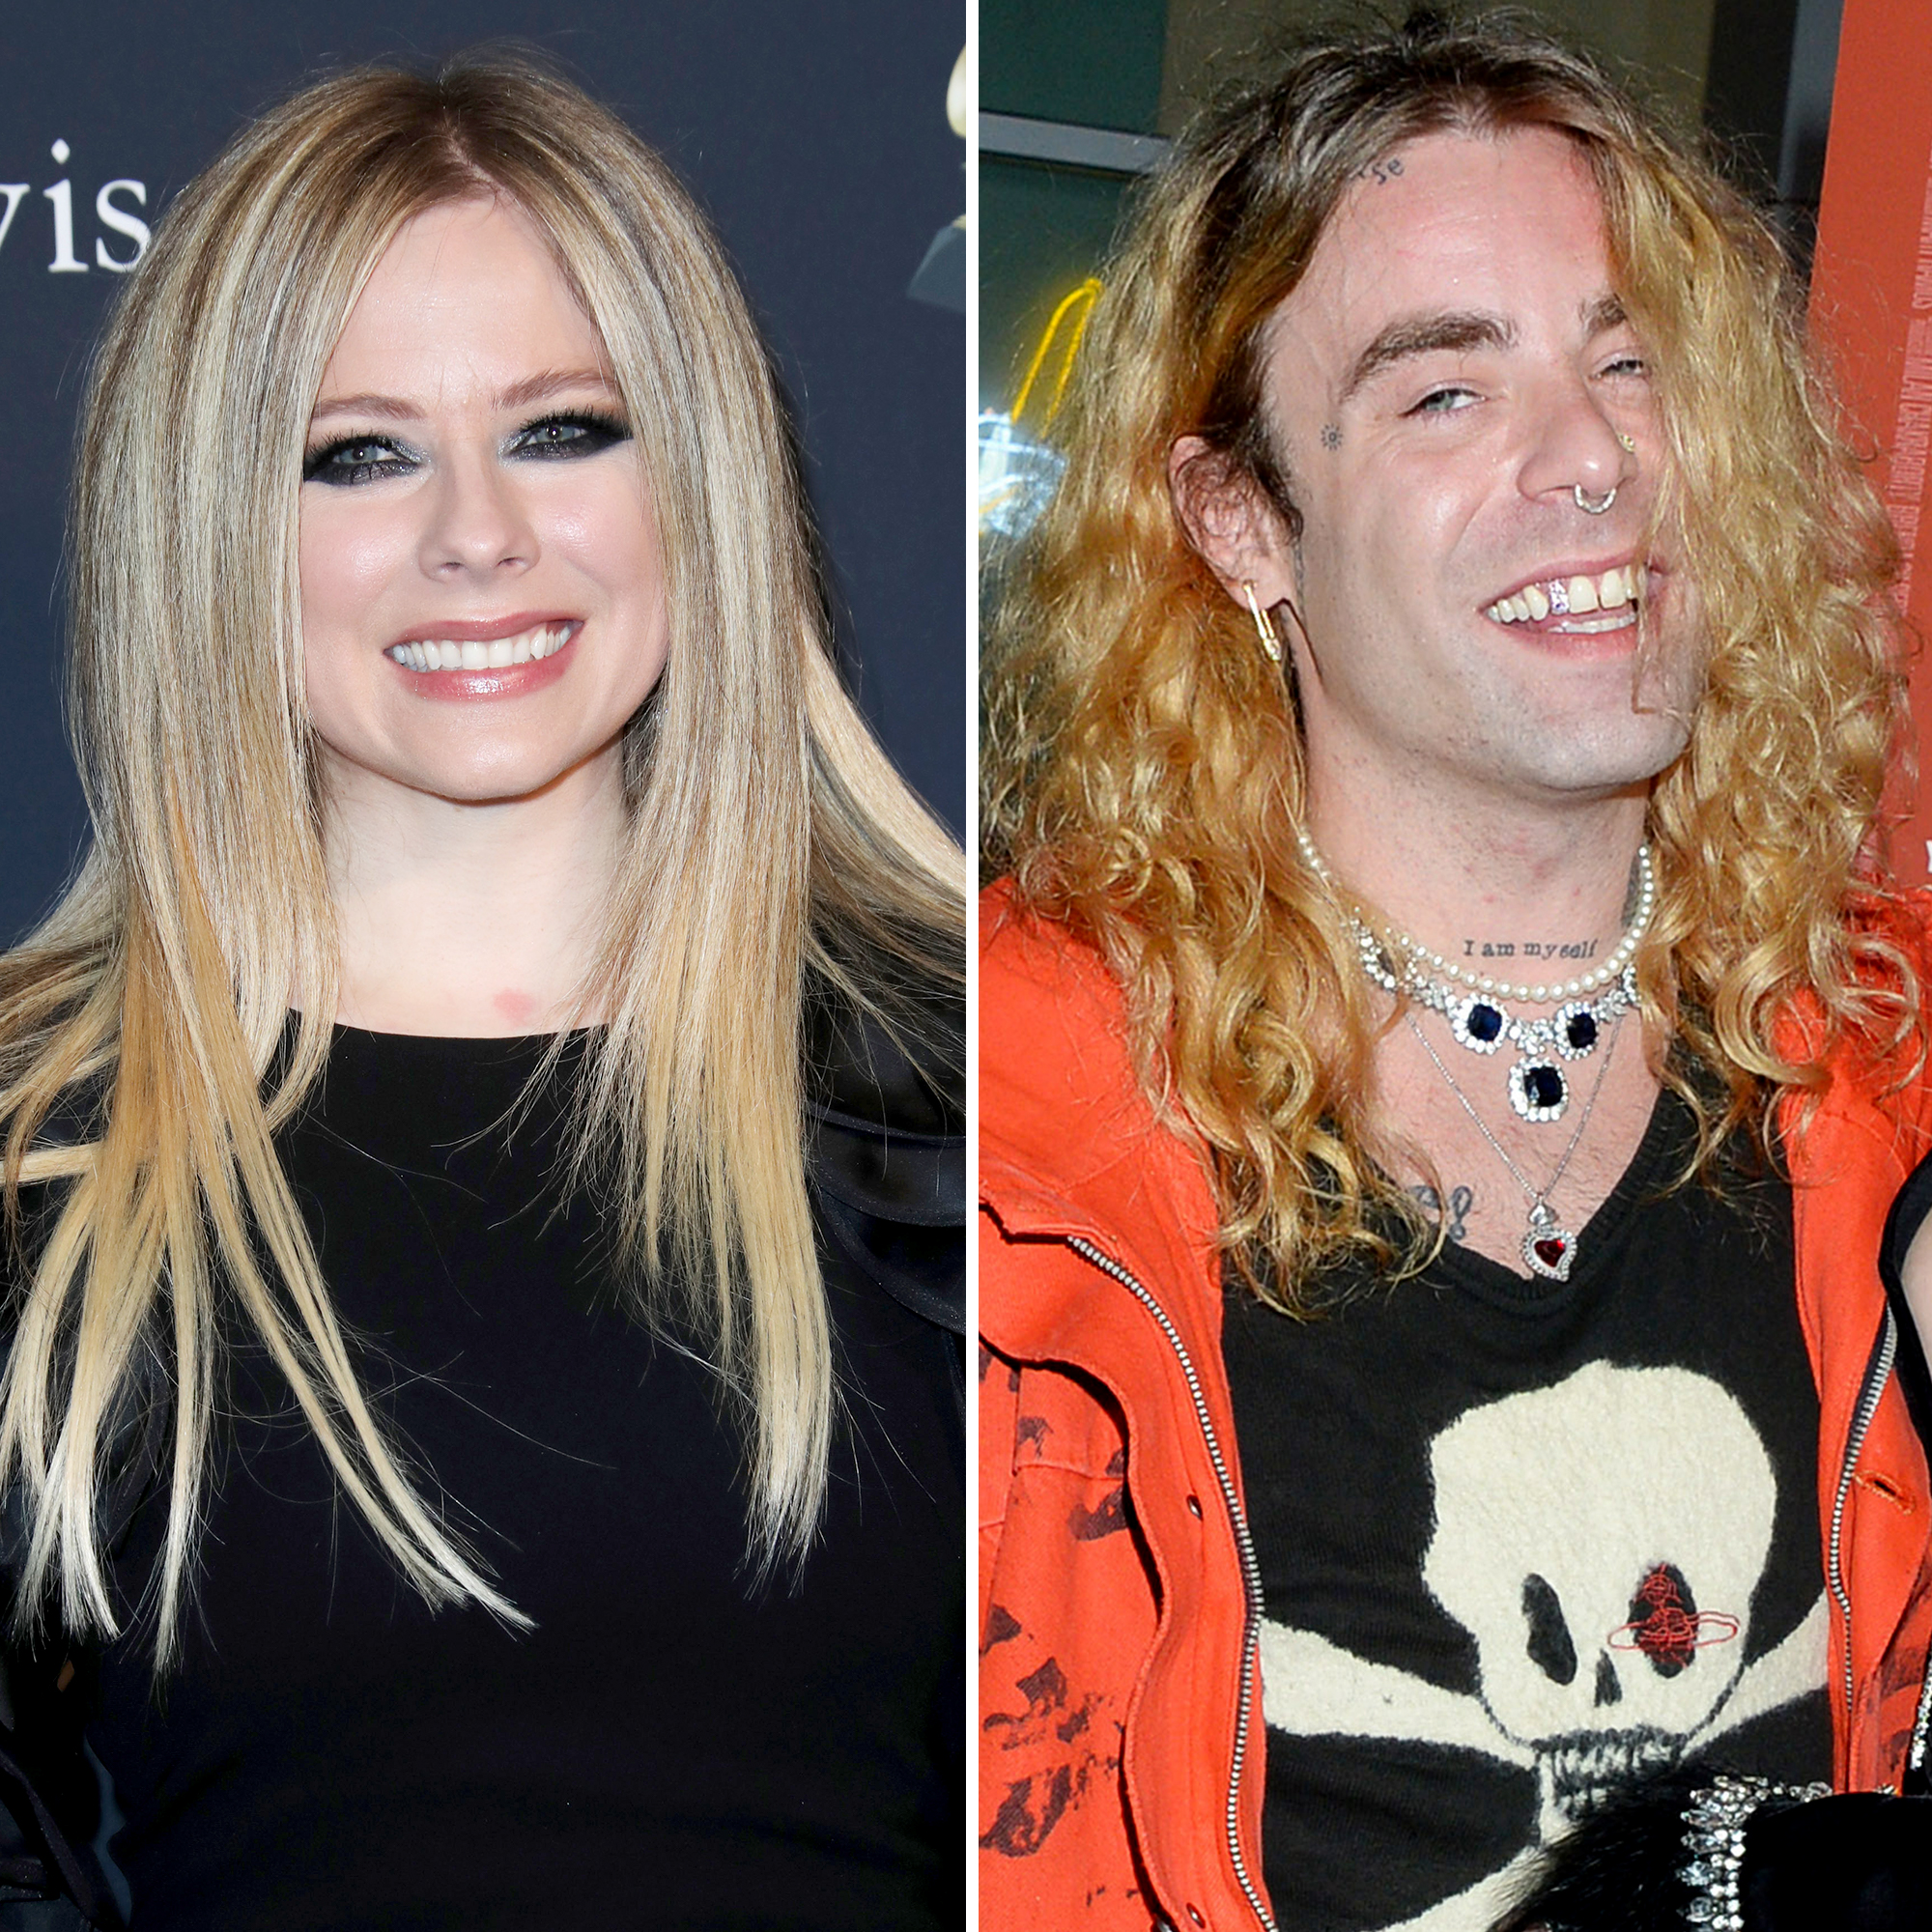 Avril Lavigne Lesbian Porn - Avril Lavigne Is Dating Mod Sun: 'They're Seeing Each Other'